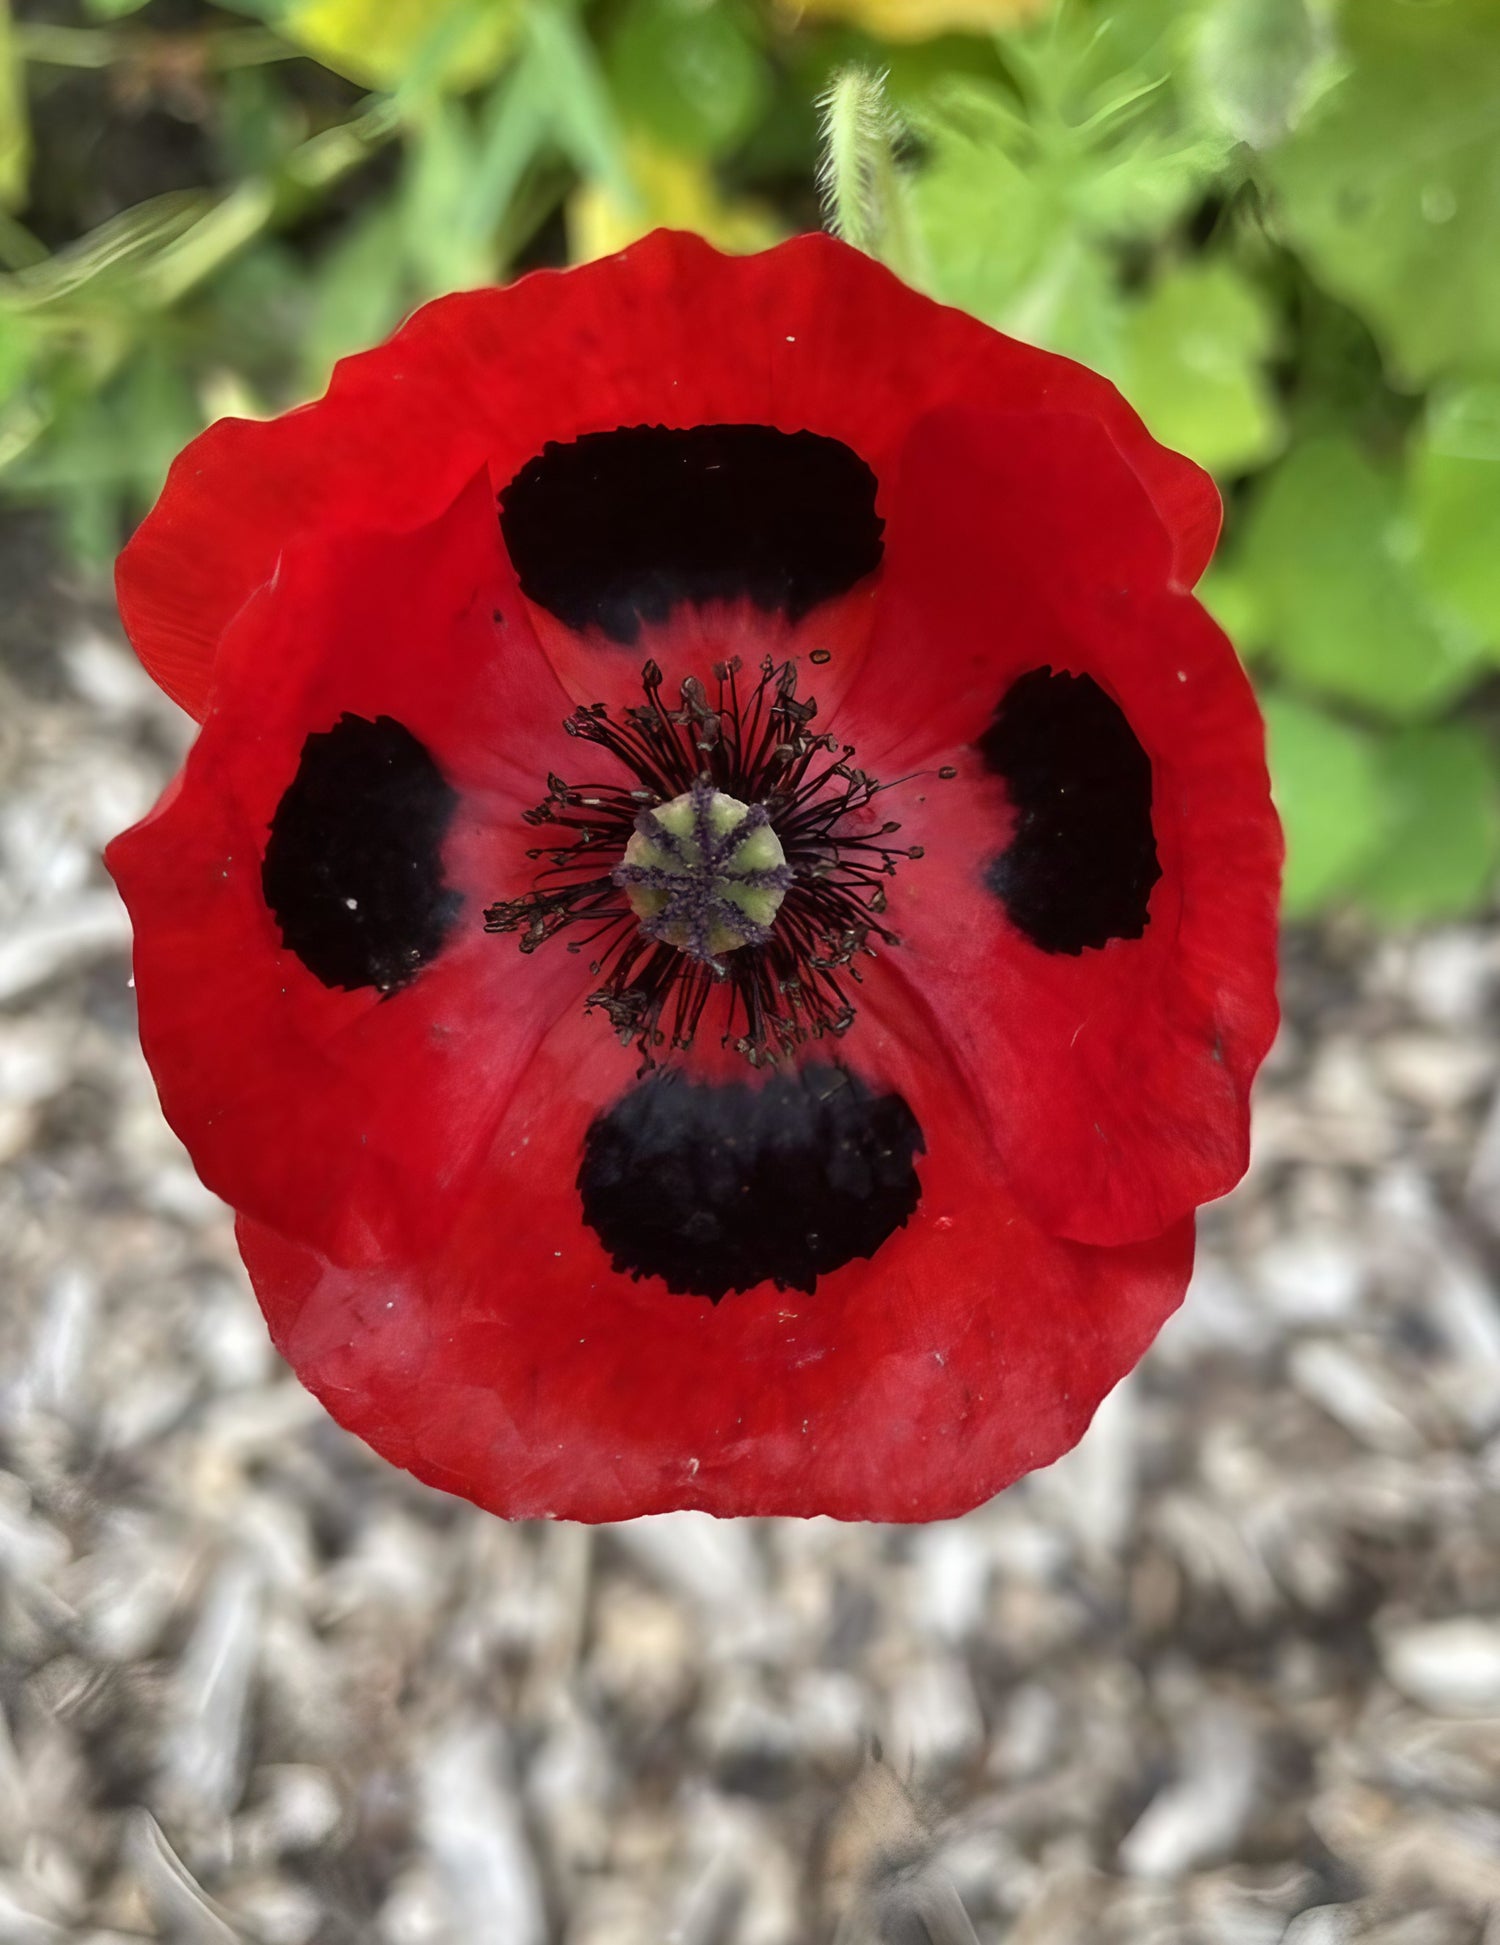 Single Poppy Ladybird bloom with red petals and black markings